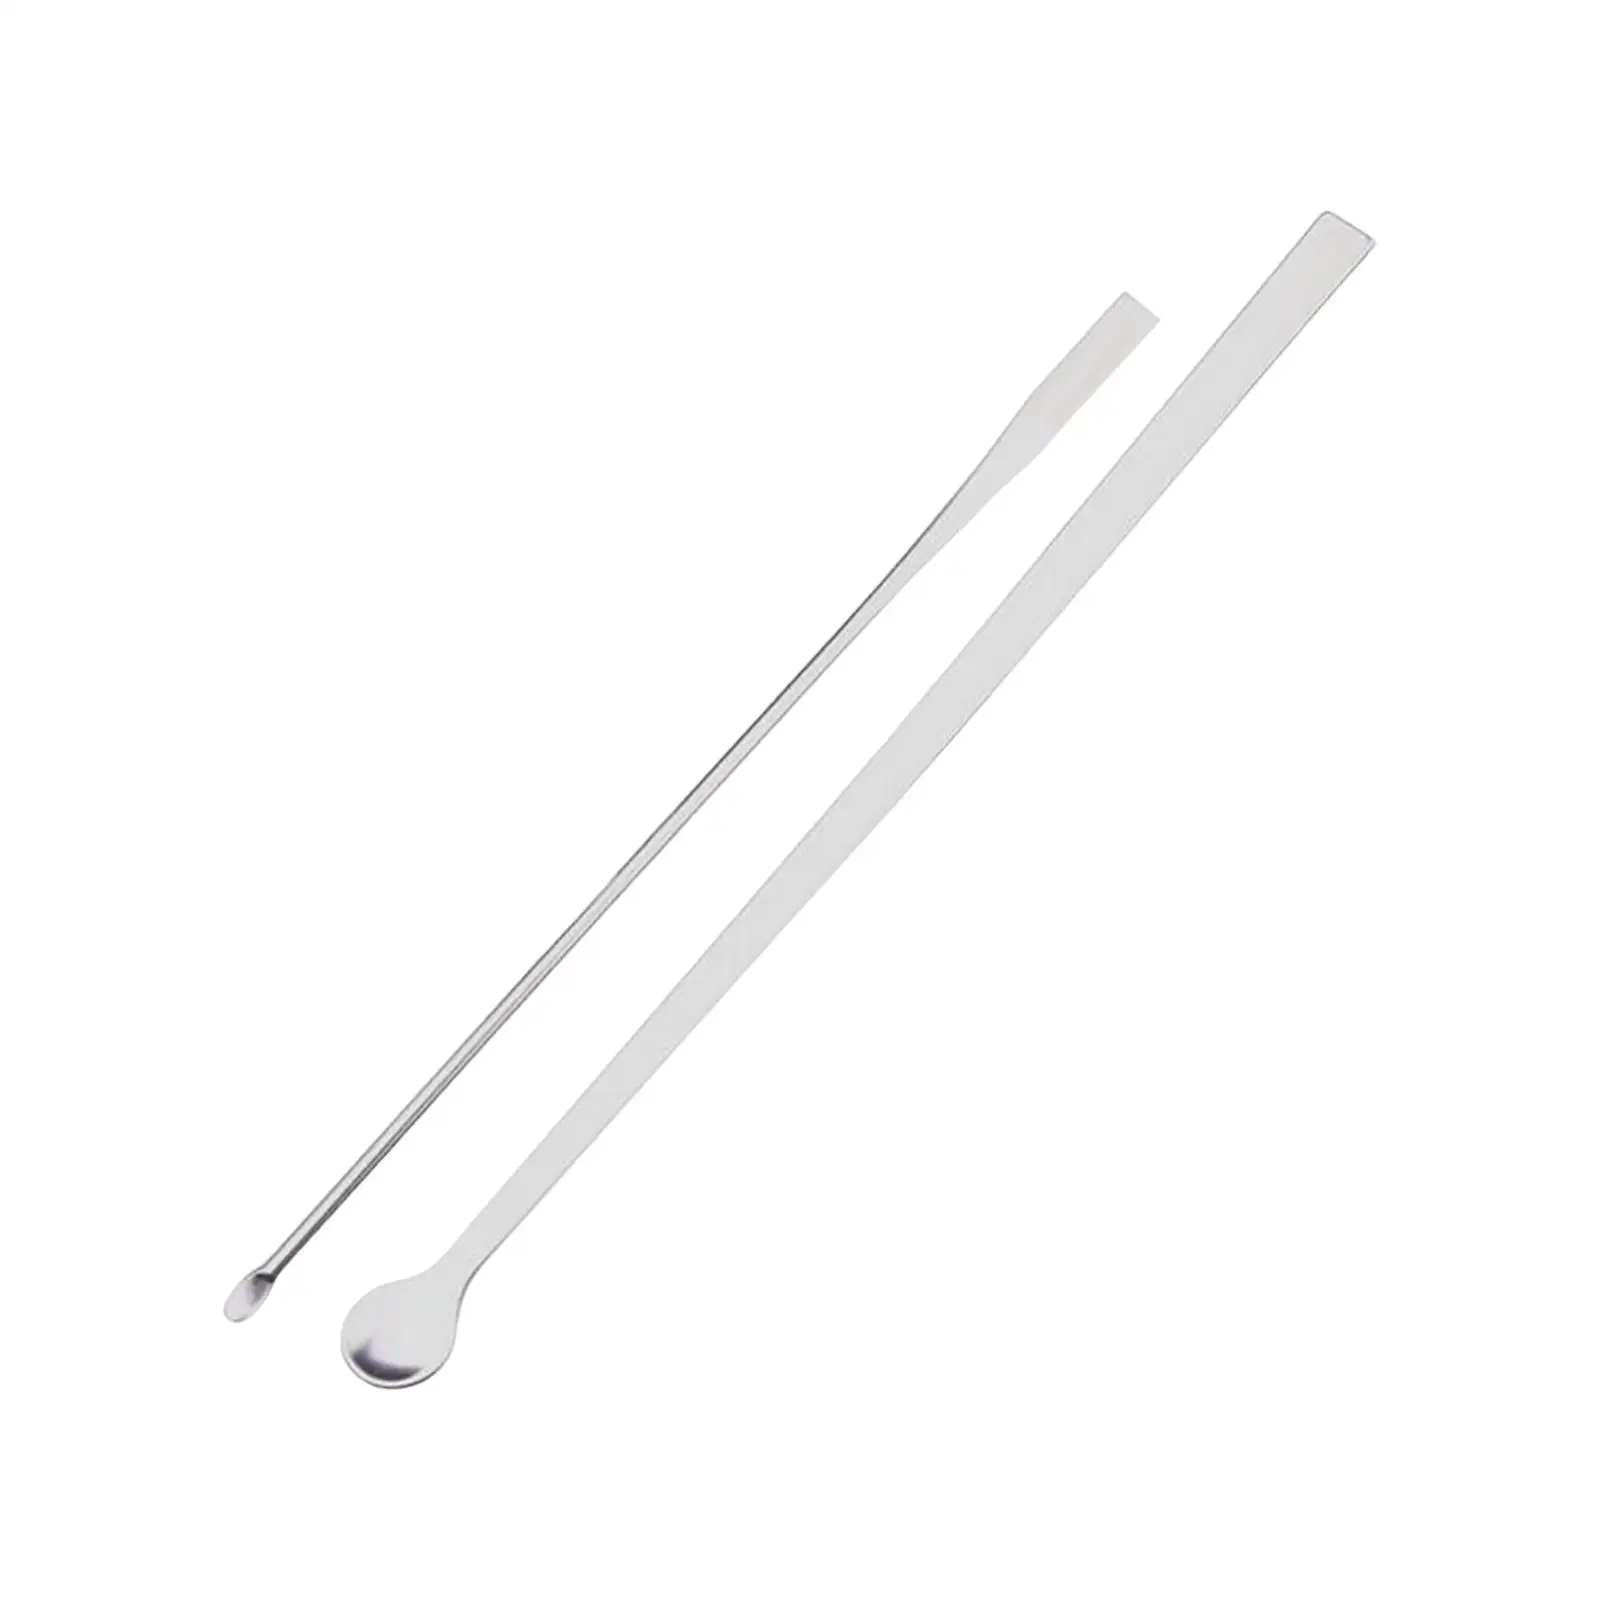 2 Pieces Paint Stirrer Crafting Tools Large Mixing Color Tool Lightweight Durable Portable DIY Stir Rod for Accessories Painting